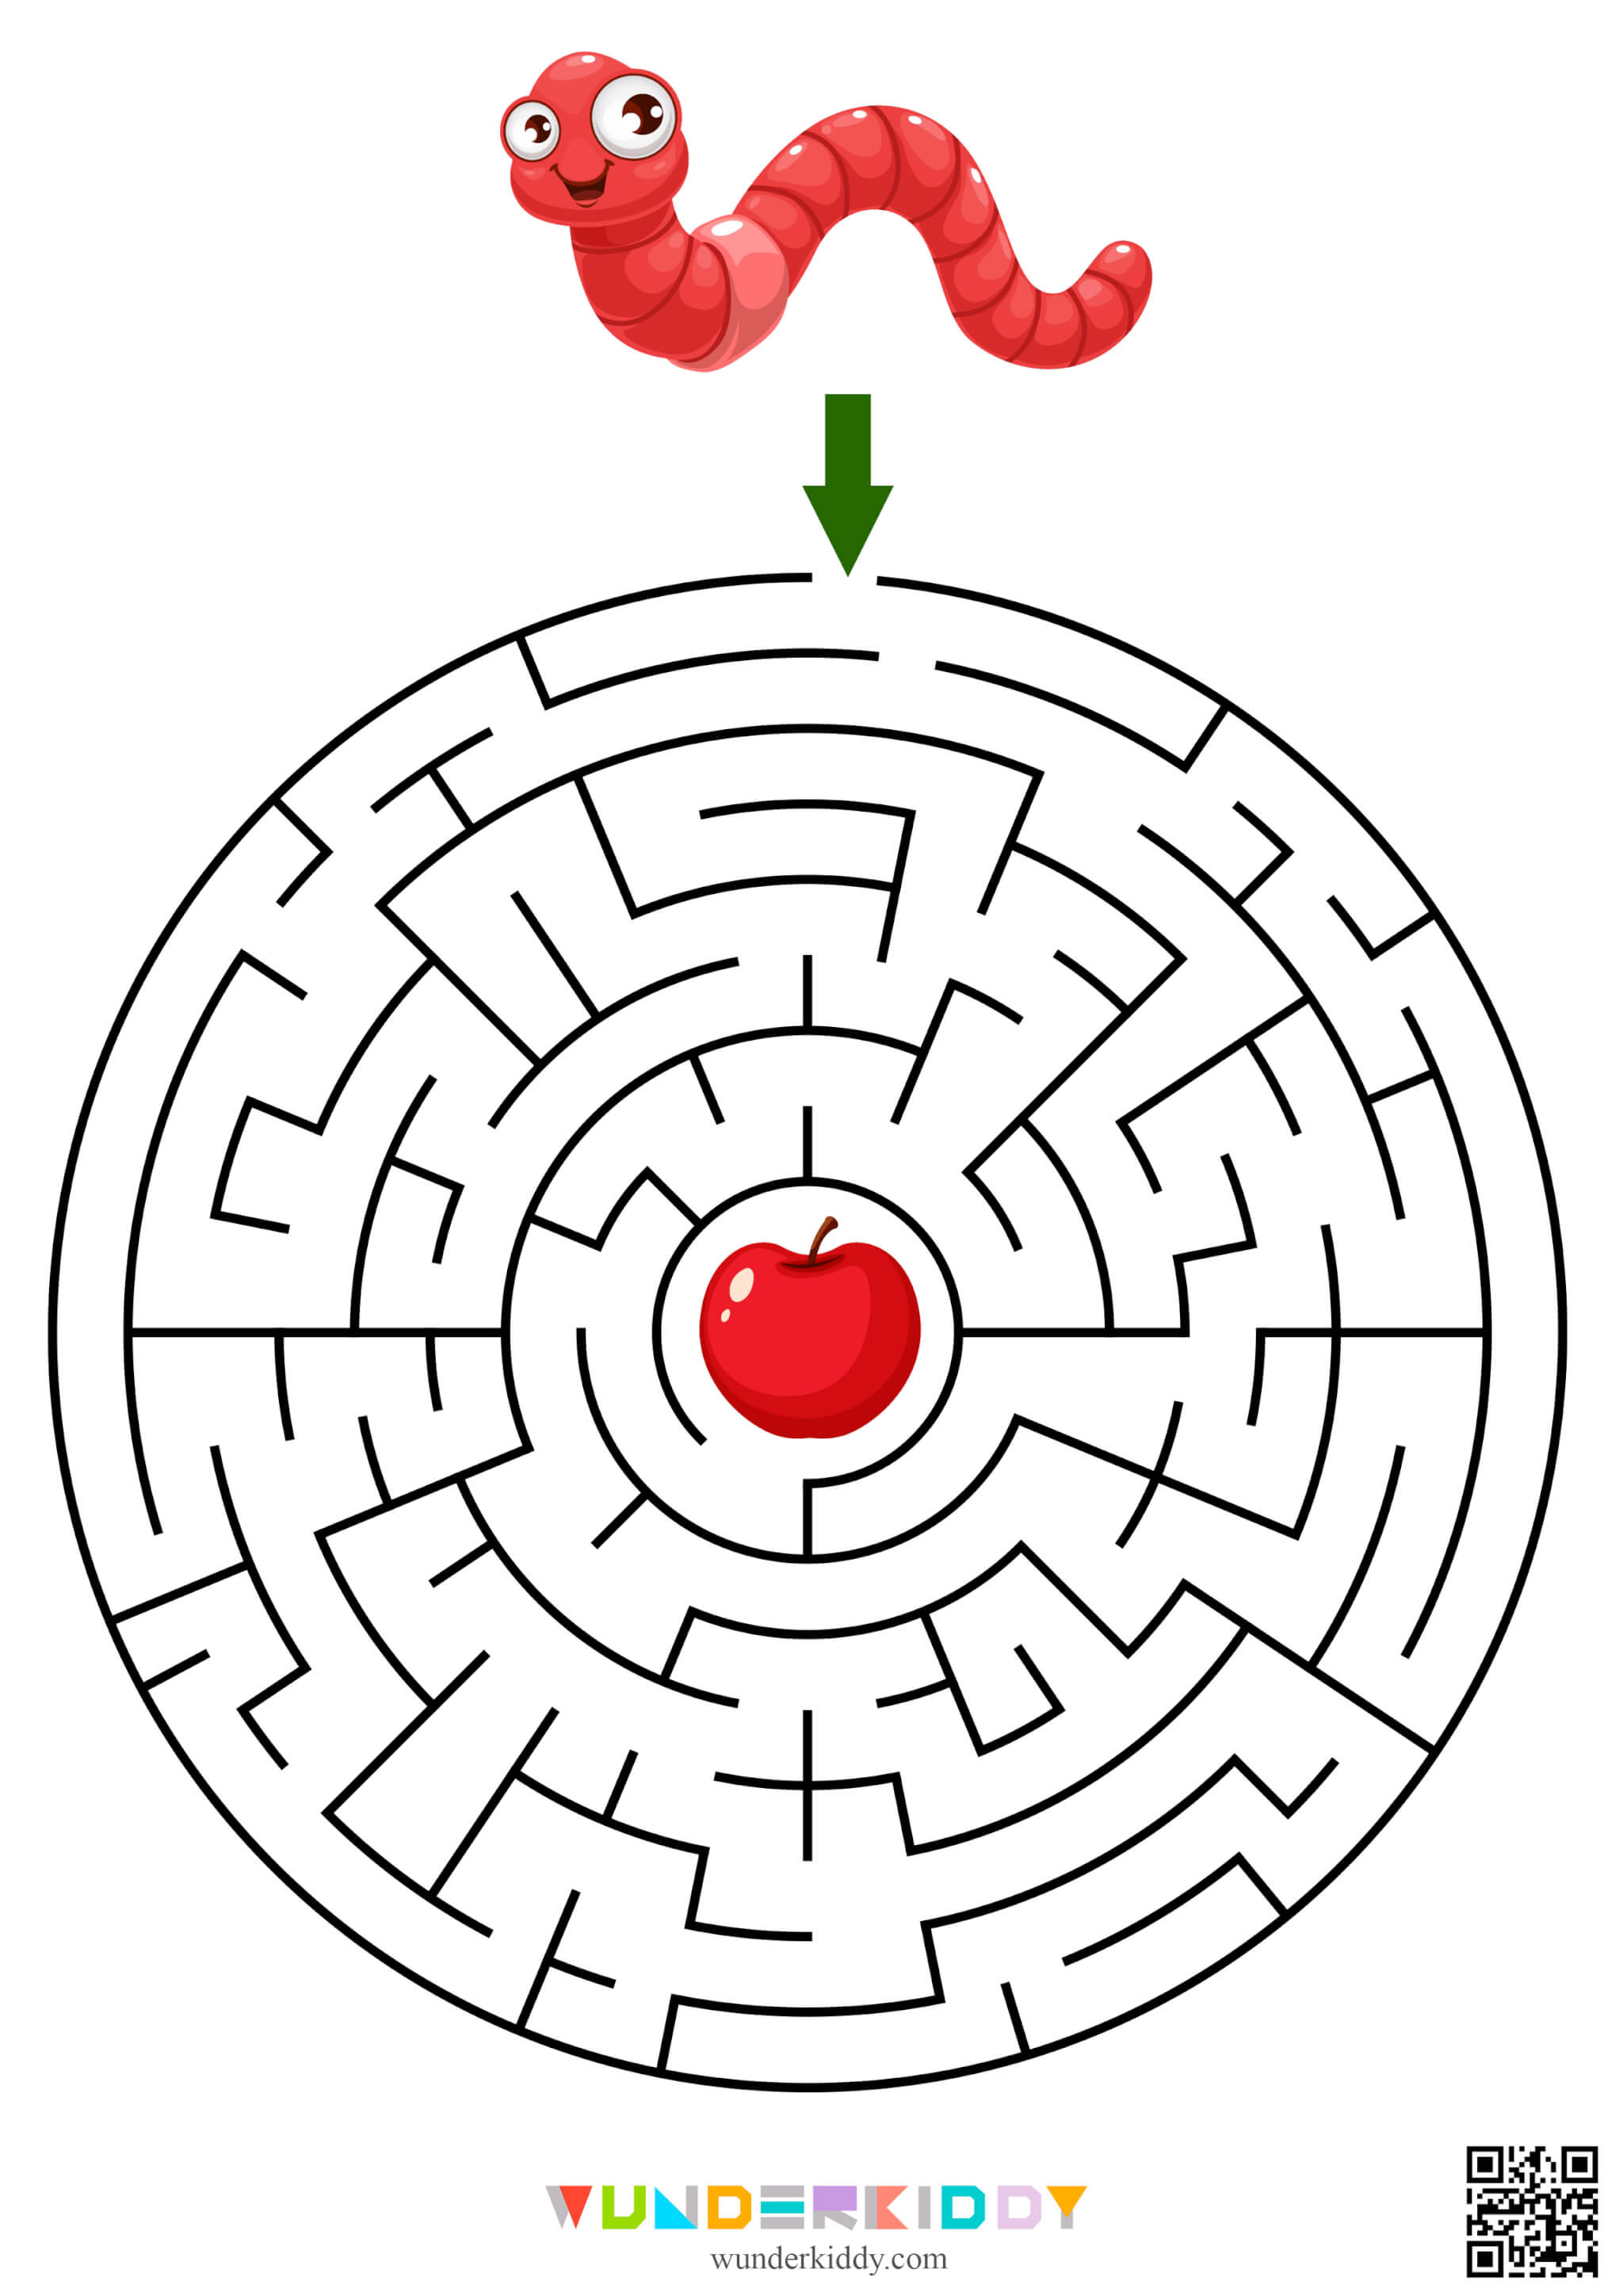 Printable Maze for Kids Help to Find the Way - Image 7